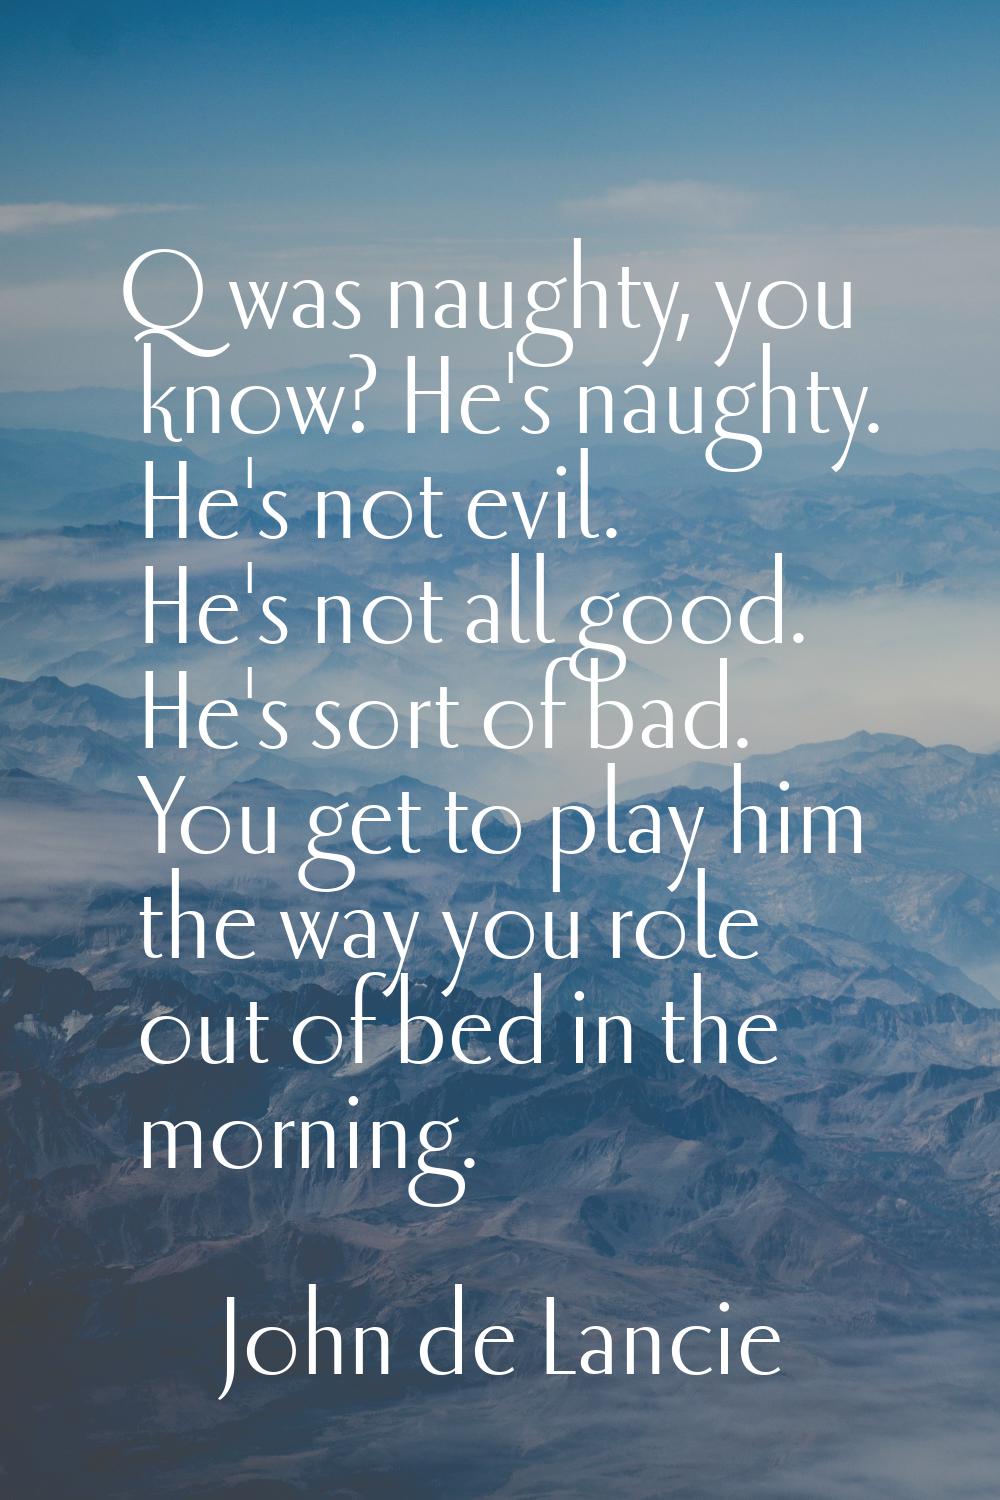 Q was naughty, you know? He's naughty. He's not evil. He's not all good. He's sort of bad. You get 